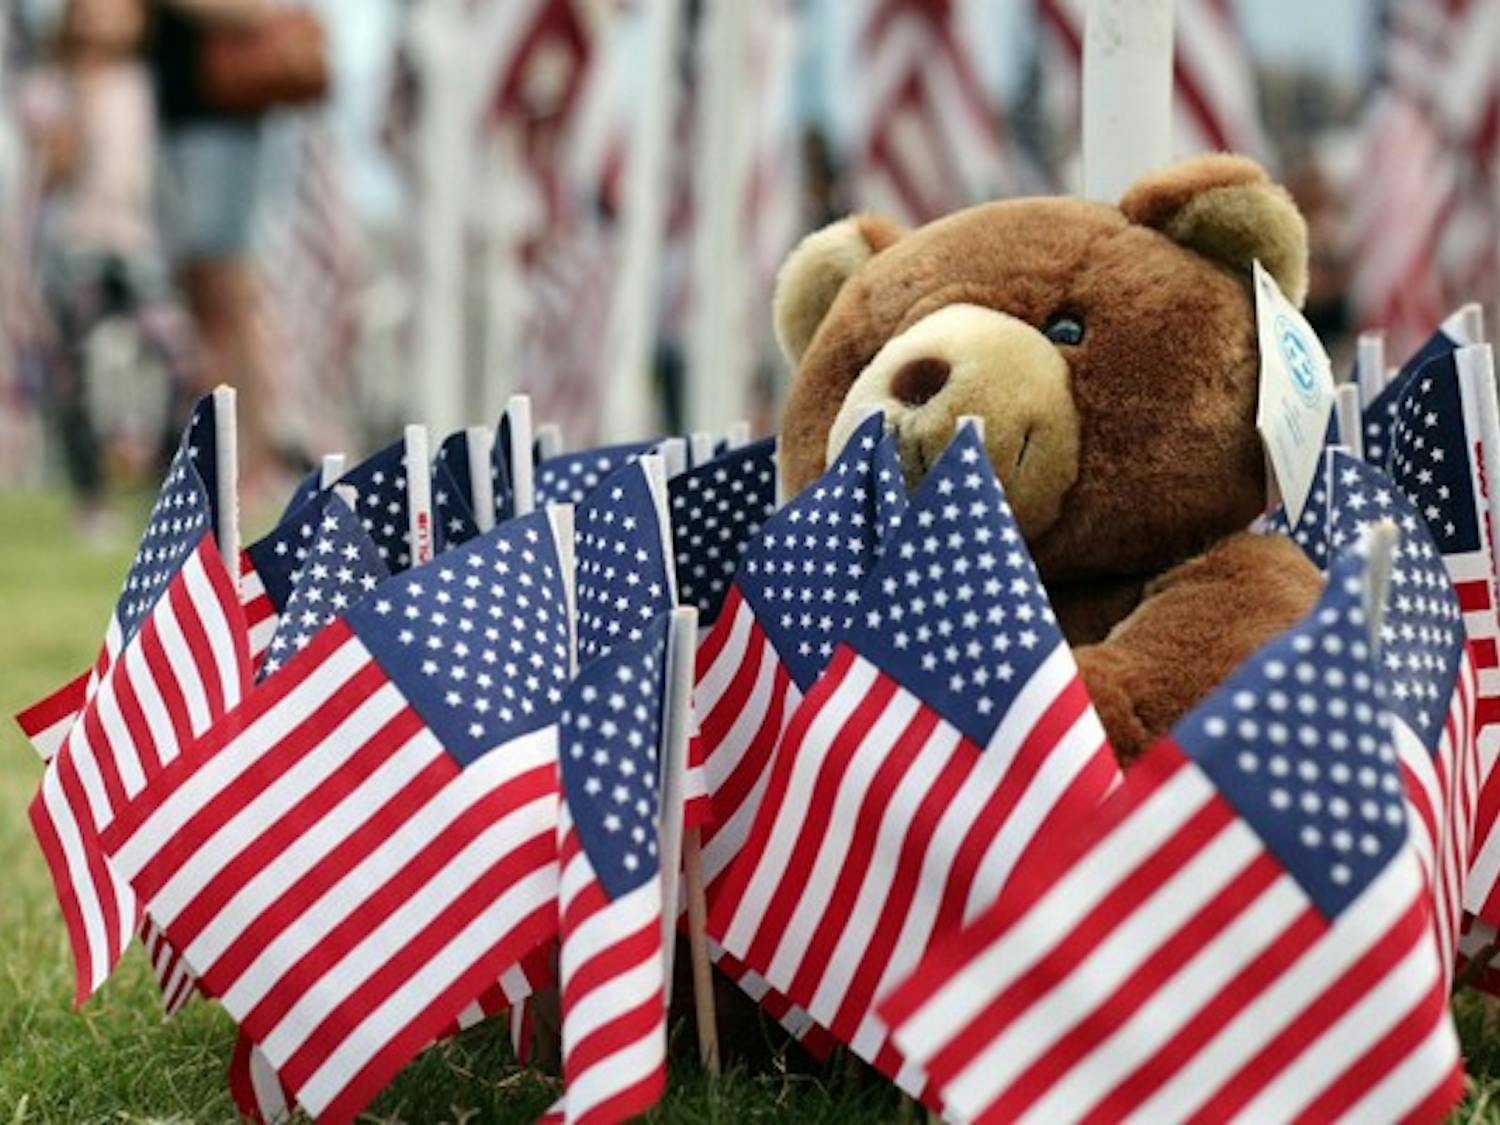 THE LITTLE THINGS: A teddy bear rests at the base of a flag at the Healing Field 9/11 Memorial at Tempe Beach Park. The memorial is the longest running annual memorial commemorating the 9/11 terrorist attacks.  (Photo by Beth Easterbrook)